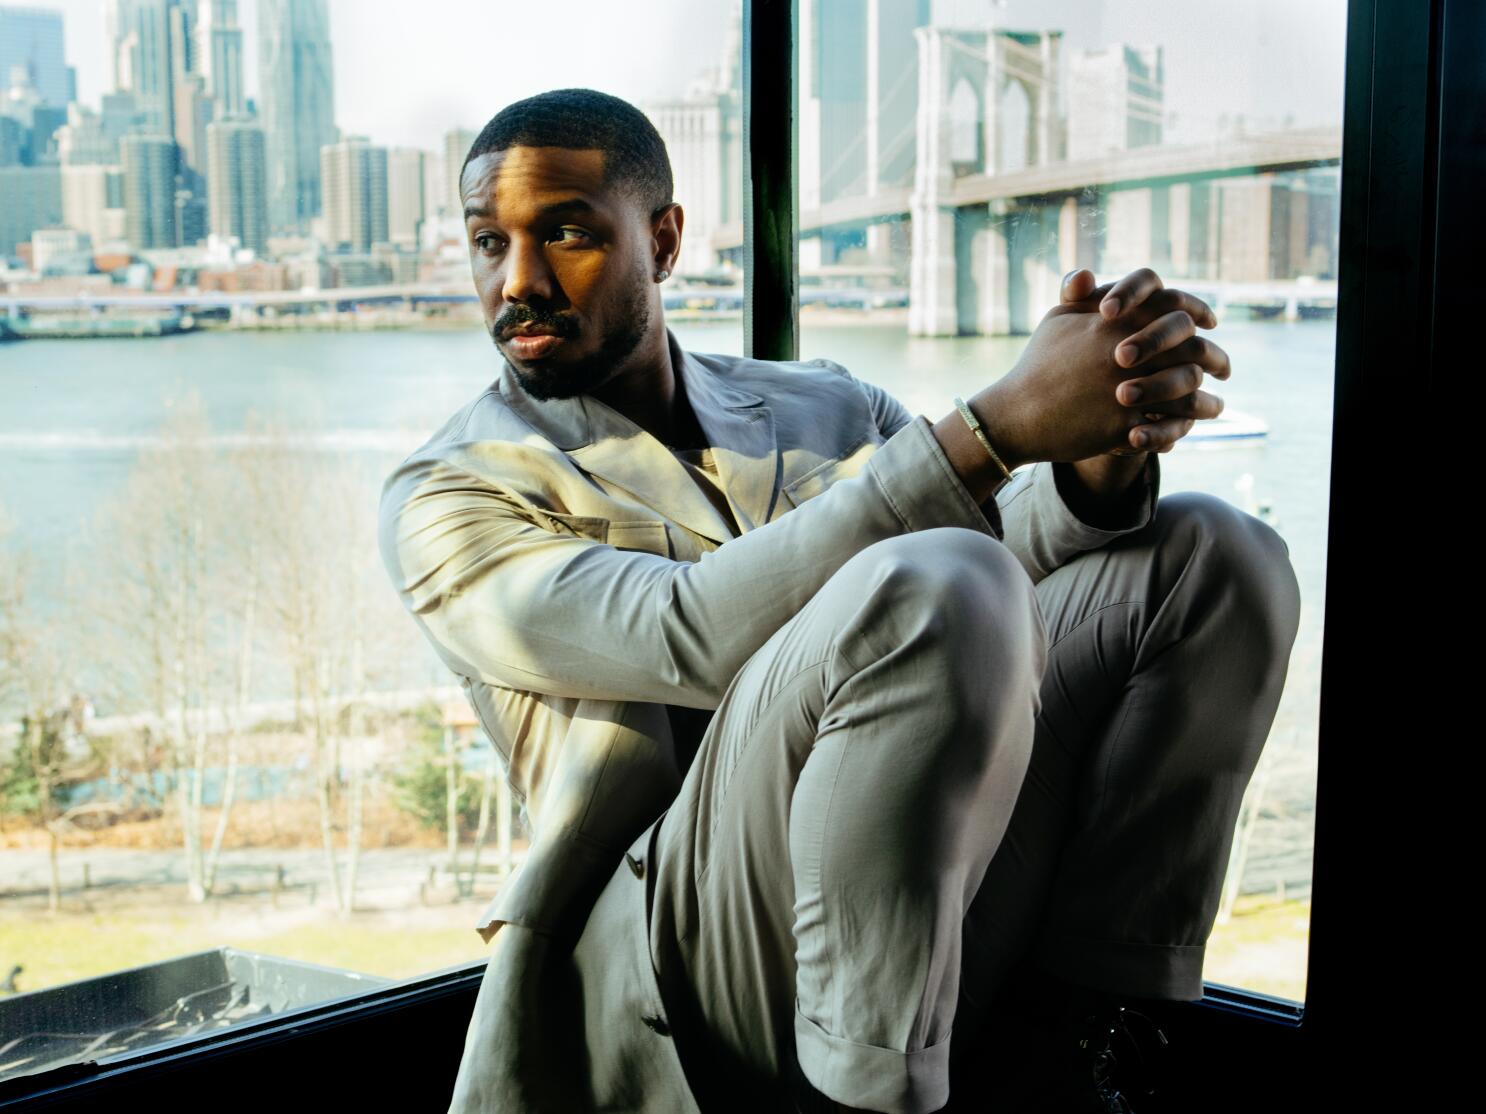 Michael B. Jordan Is Bringing Diverse Drive-In Movies To Numerous